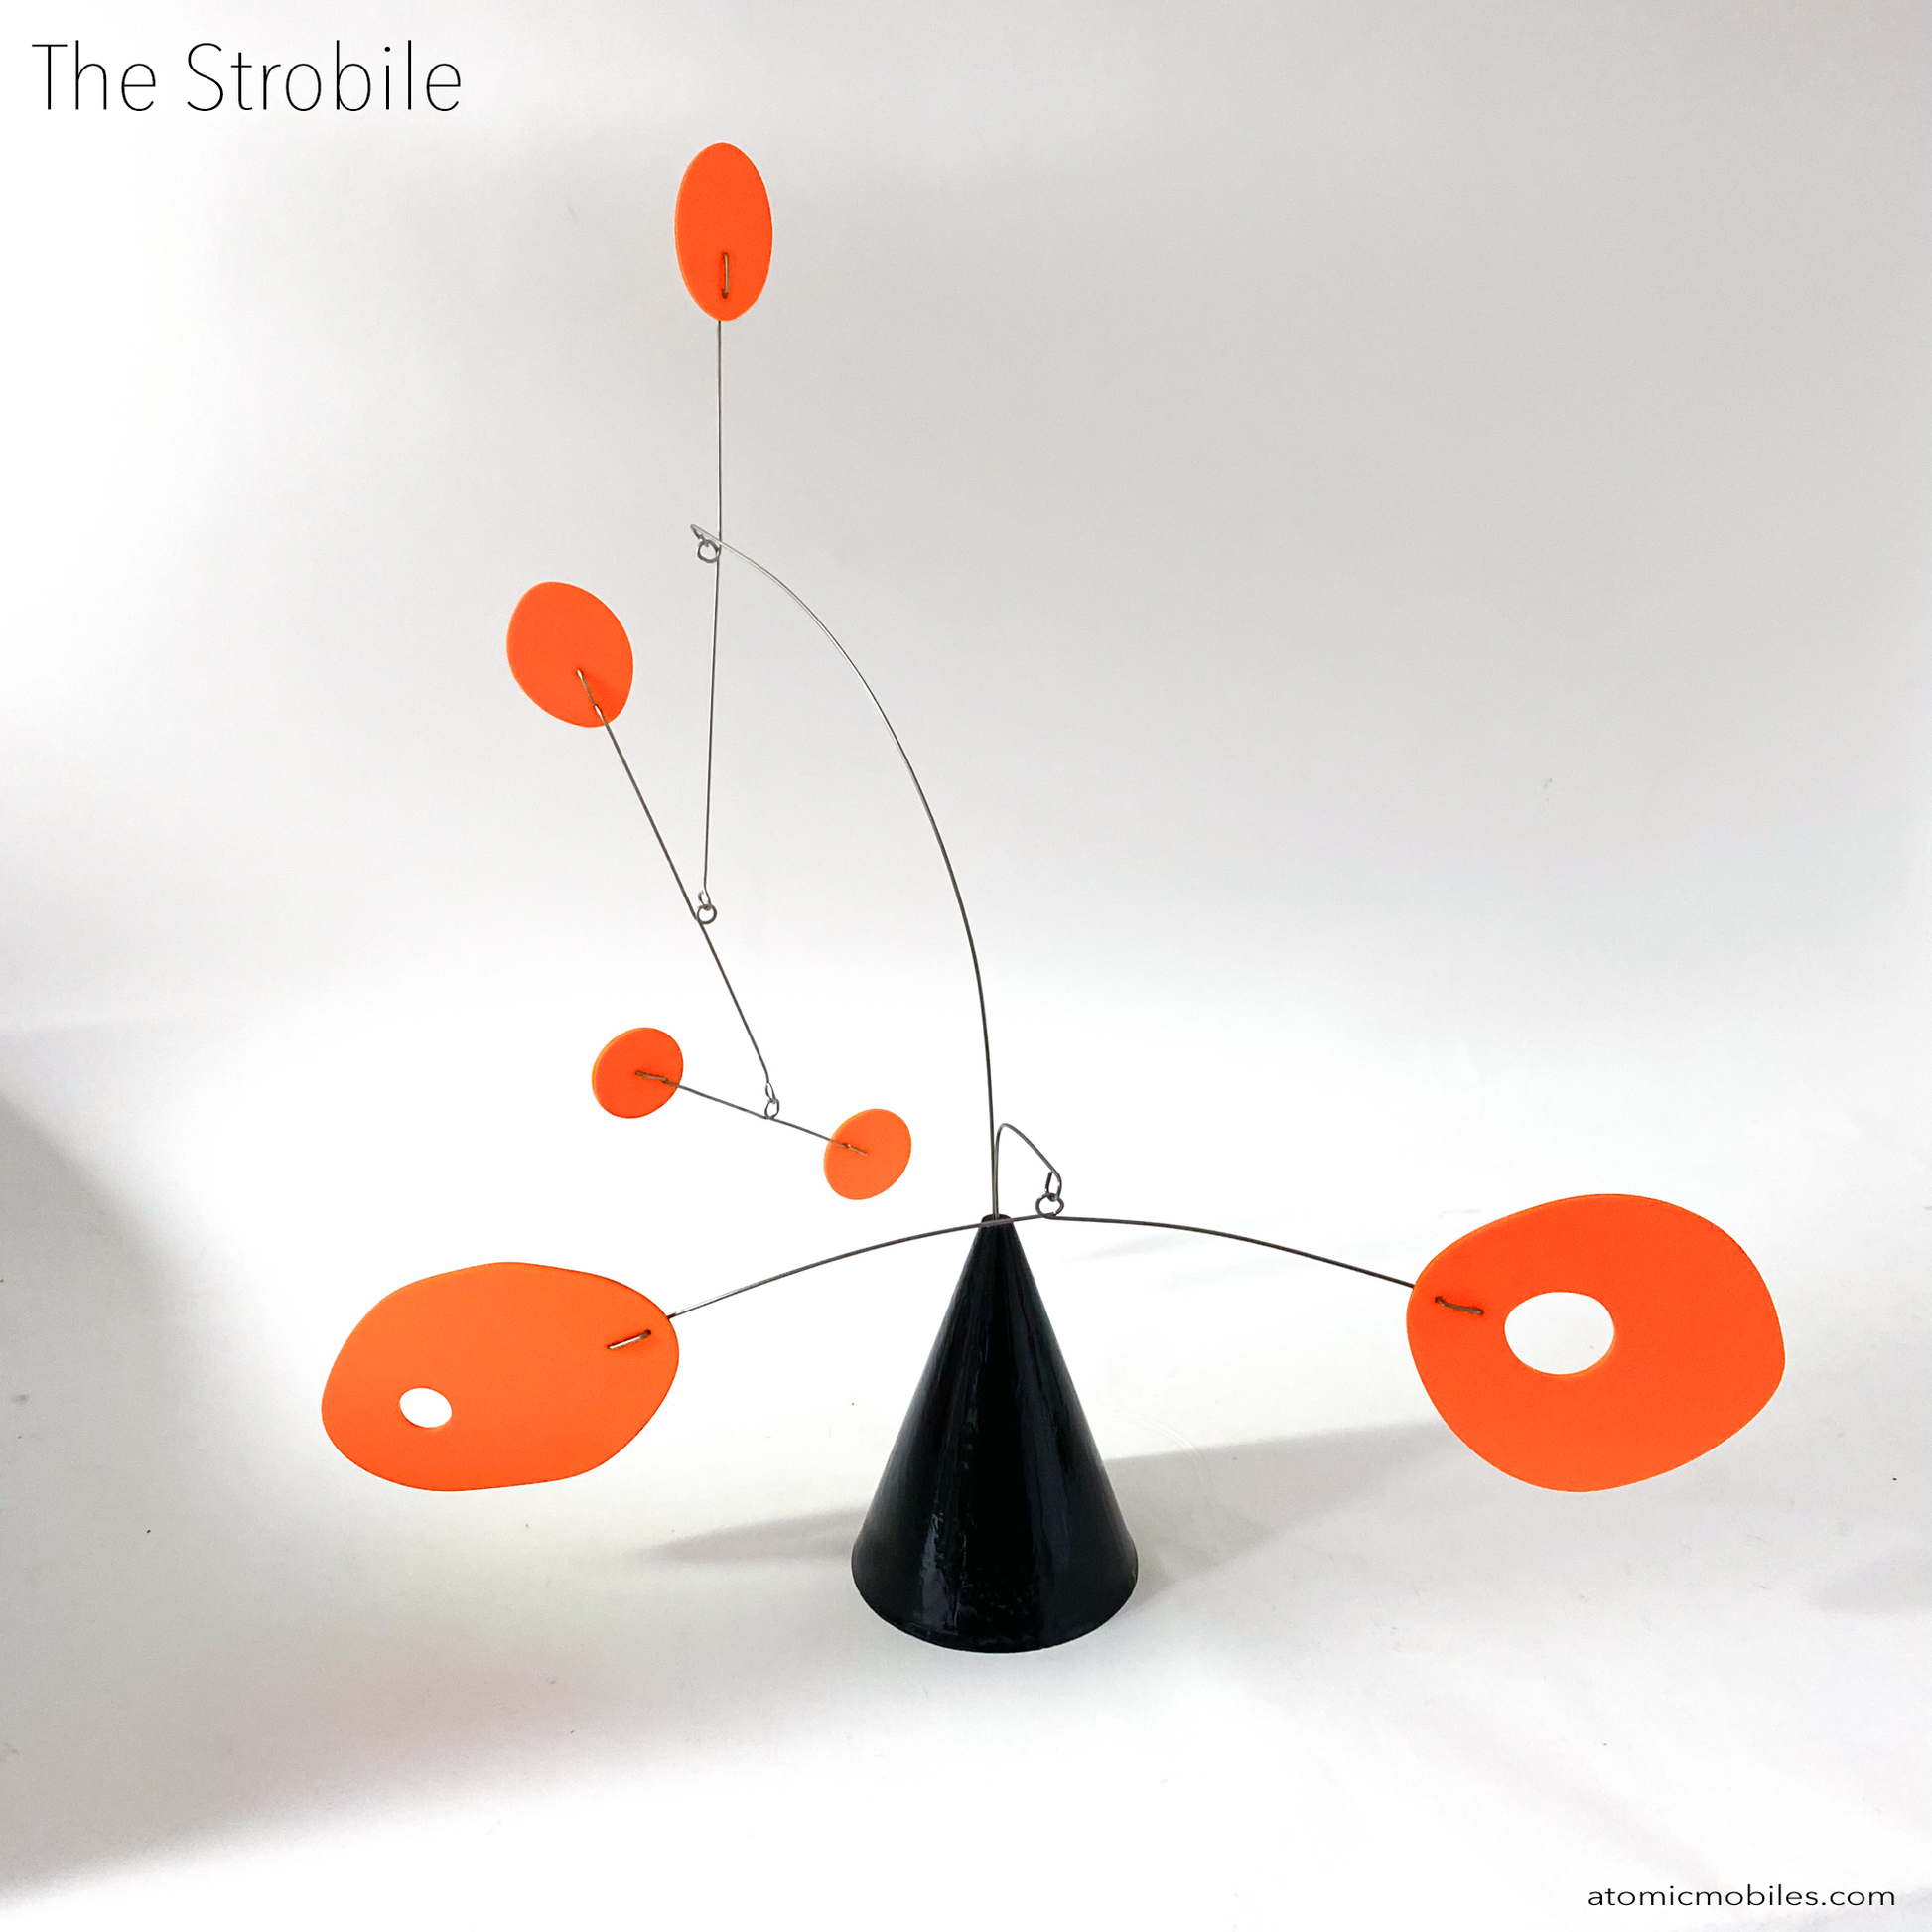 The Strobile table top kinetic art sculpture in Tangerine Orange and Black by AtomicMobiles.com